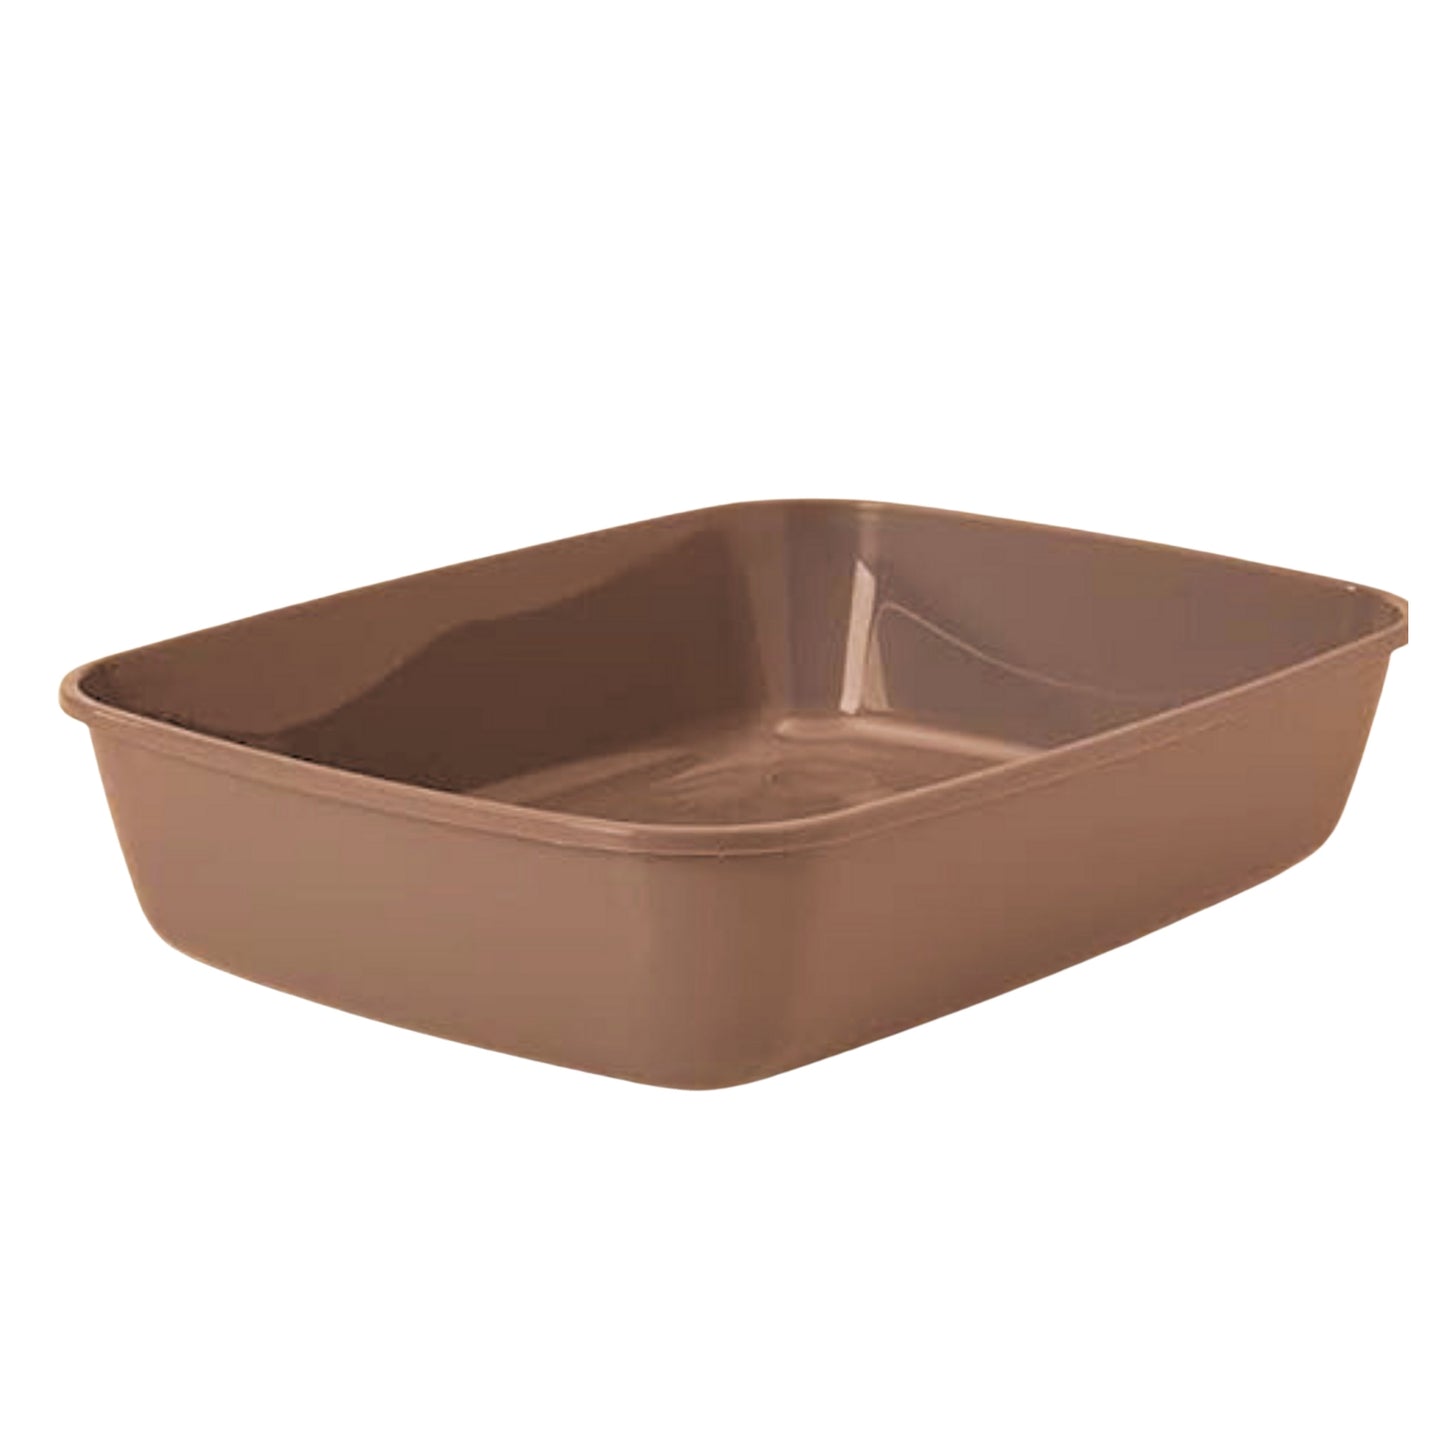 Foodie Puppies Cat Litter Tray for Small Cat and Kitten - Brown, Small